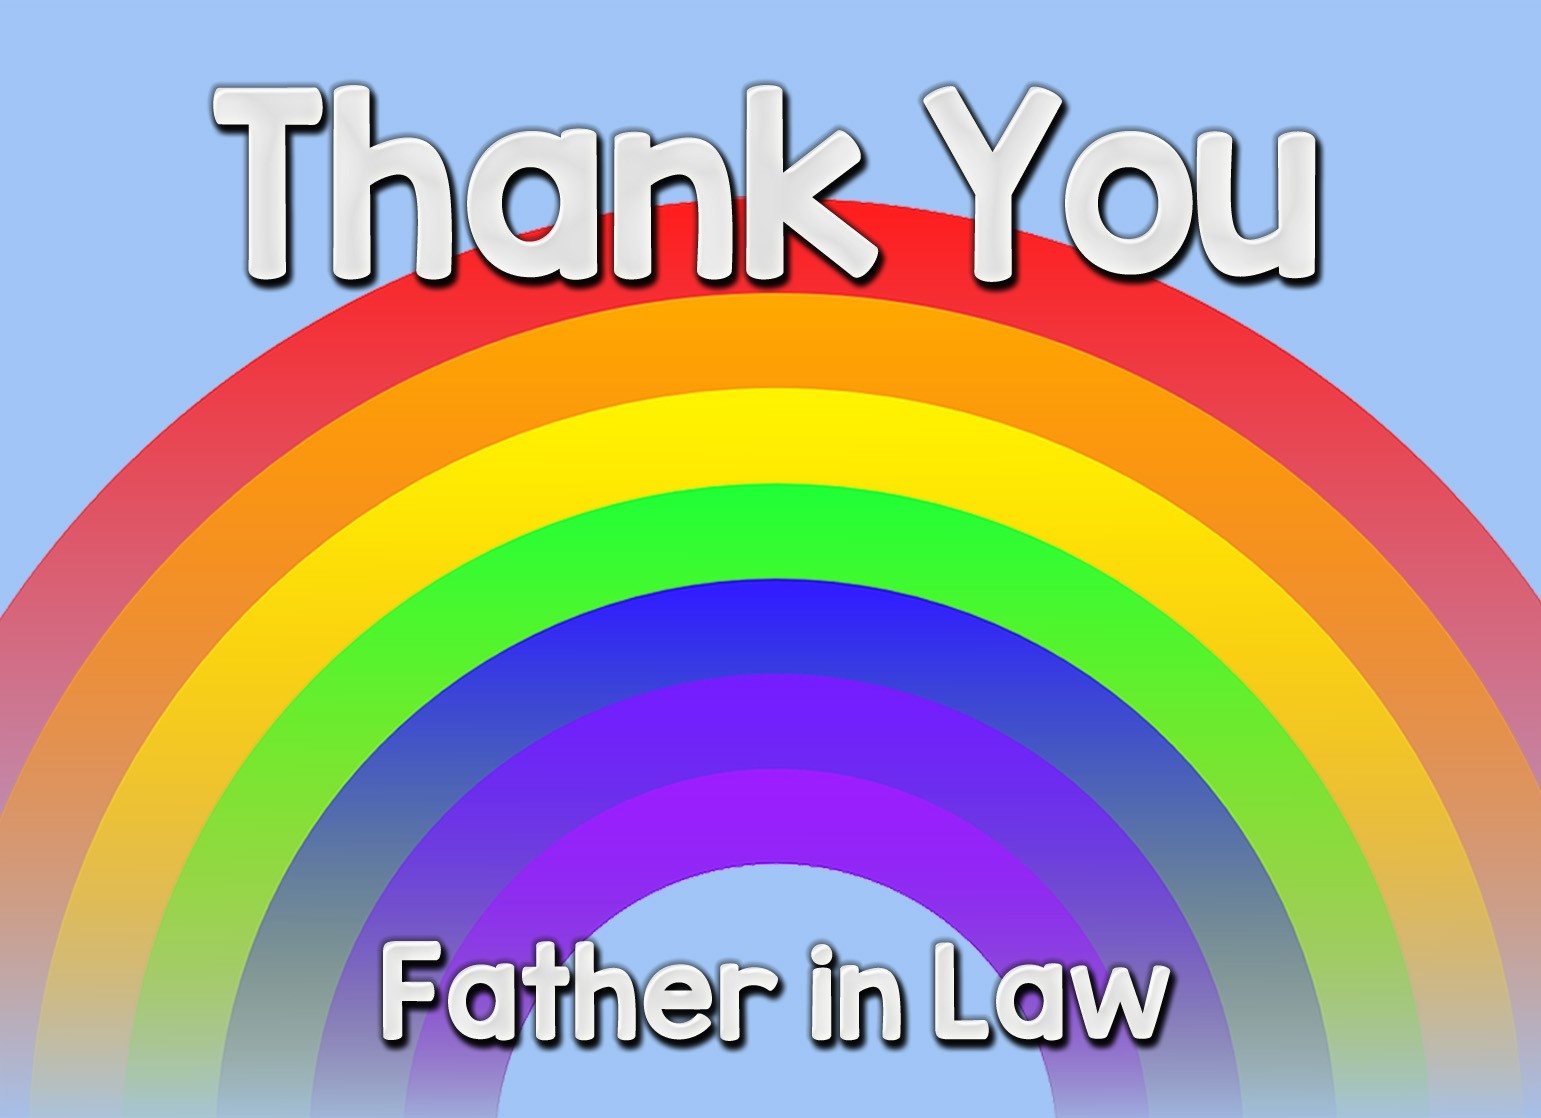 Thank You 'Father in Law' Rainbow Greeting Card